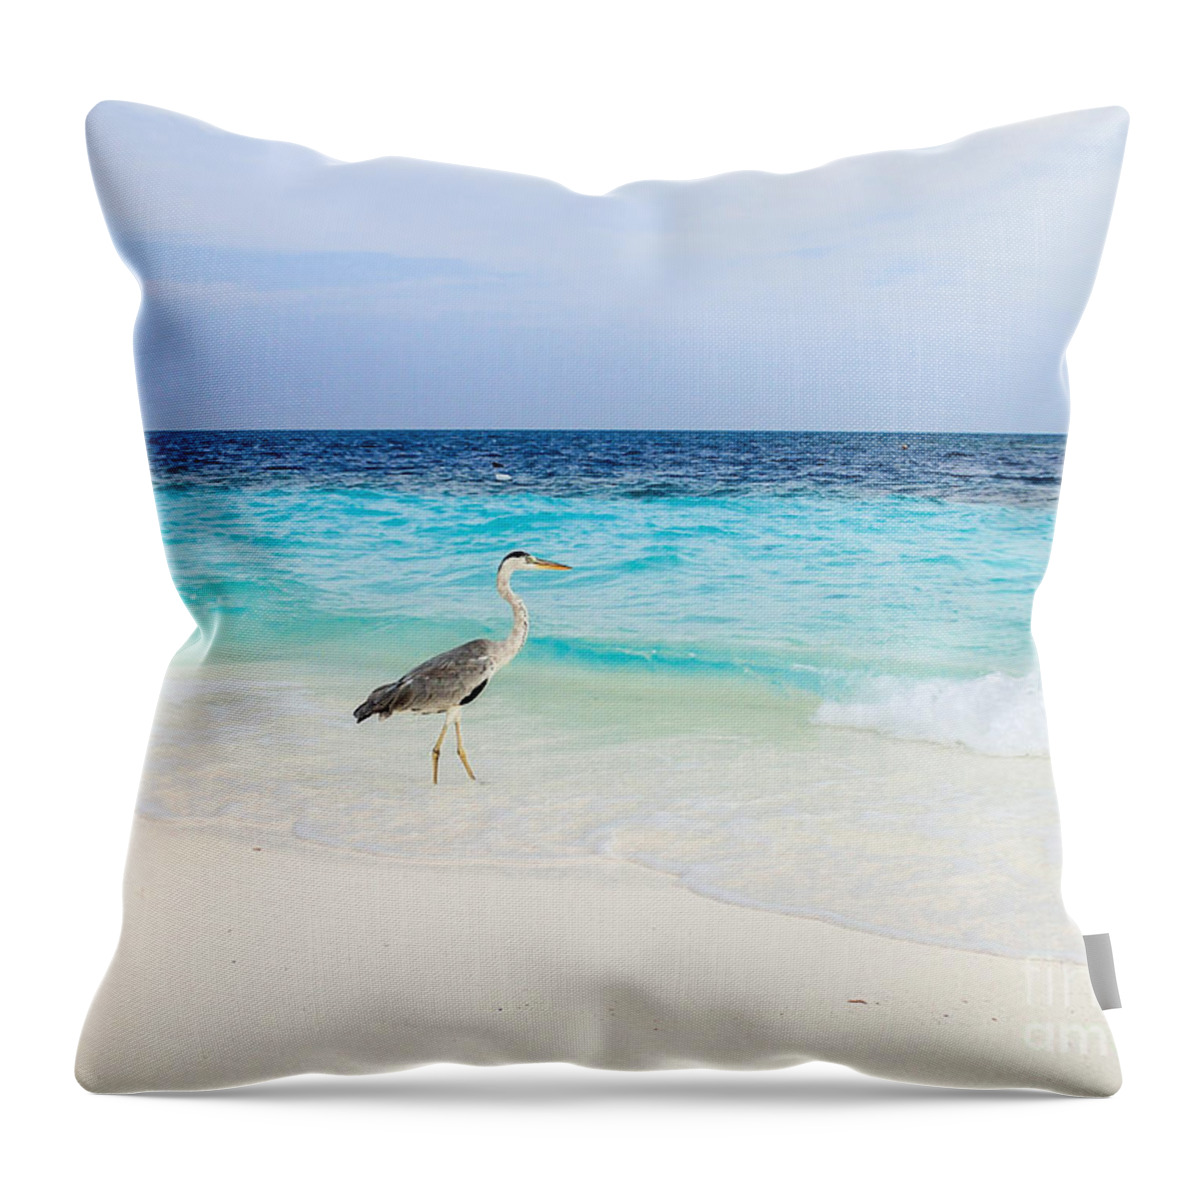 Animal Throw Pillow featuring the photograph Heron Takes A Walk At The Beach by Hannes Cmarits